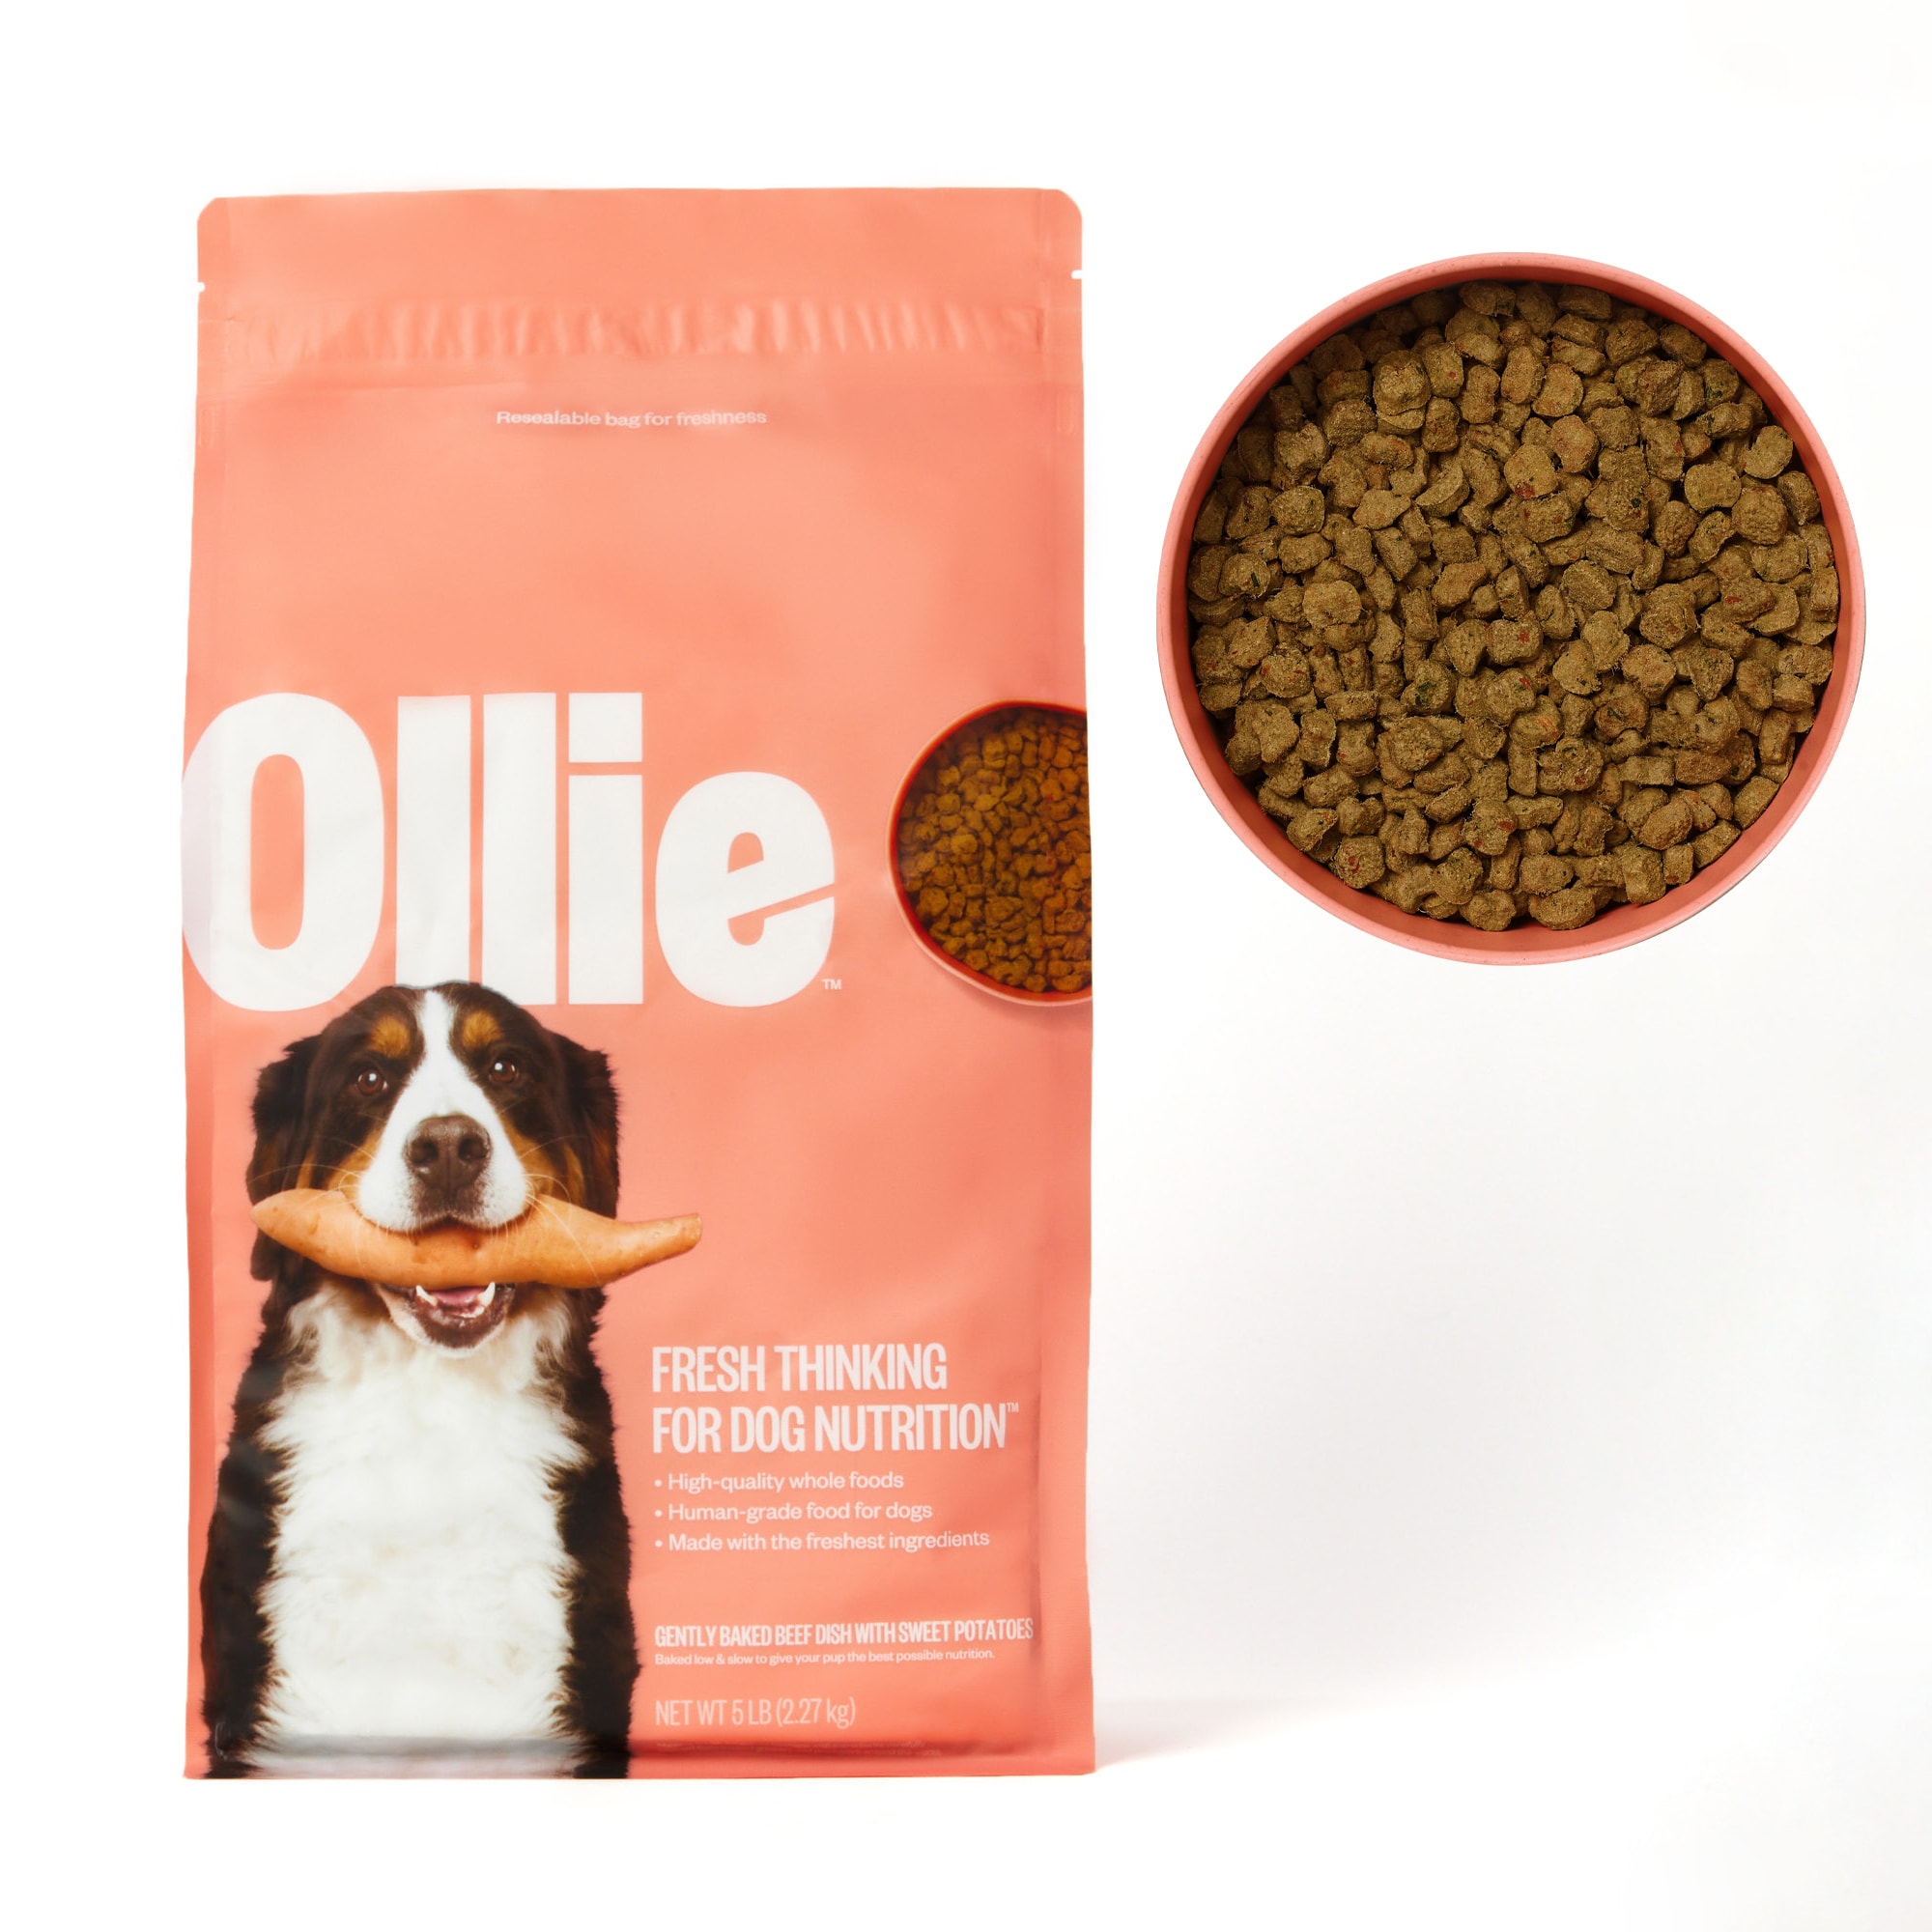 Pet food delivery: Get cat and dog food delivered with Ollie, Smalls and  more